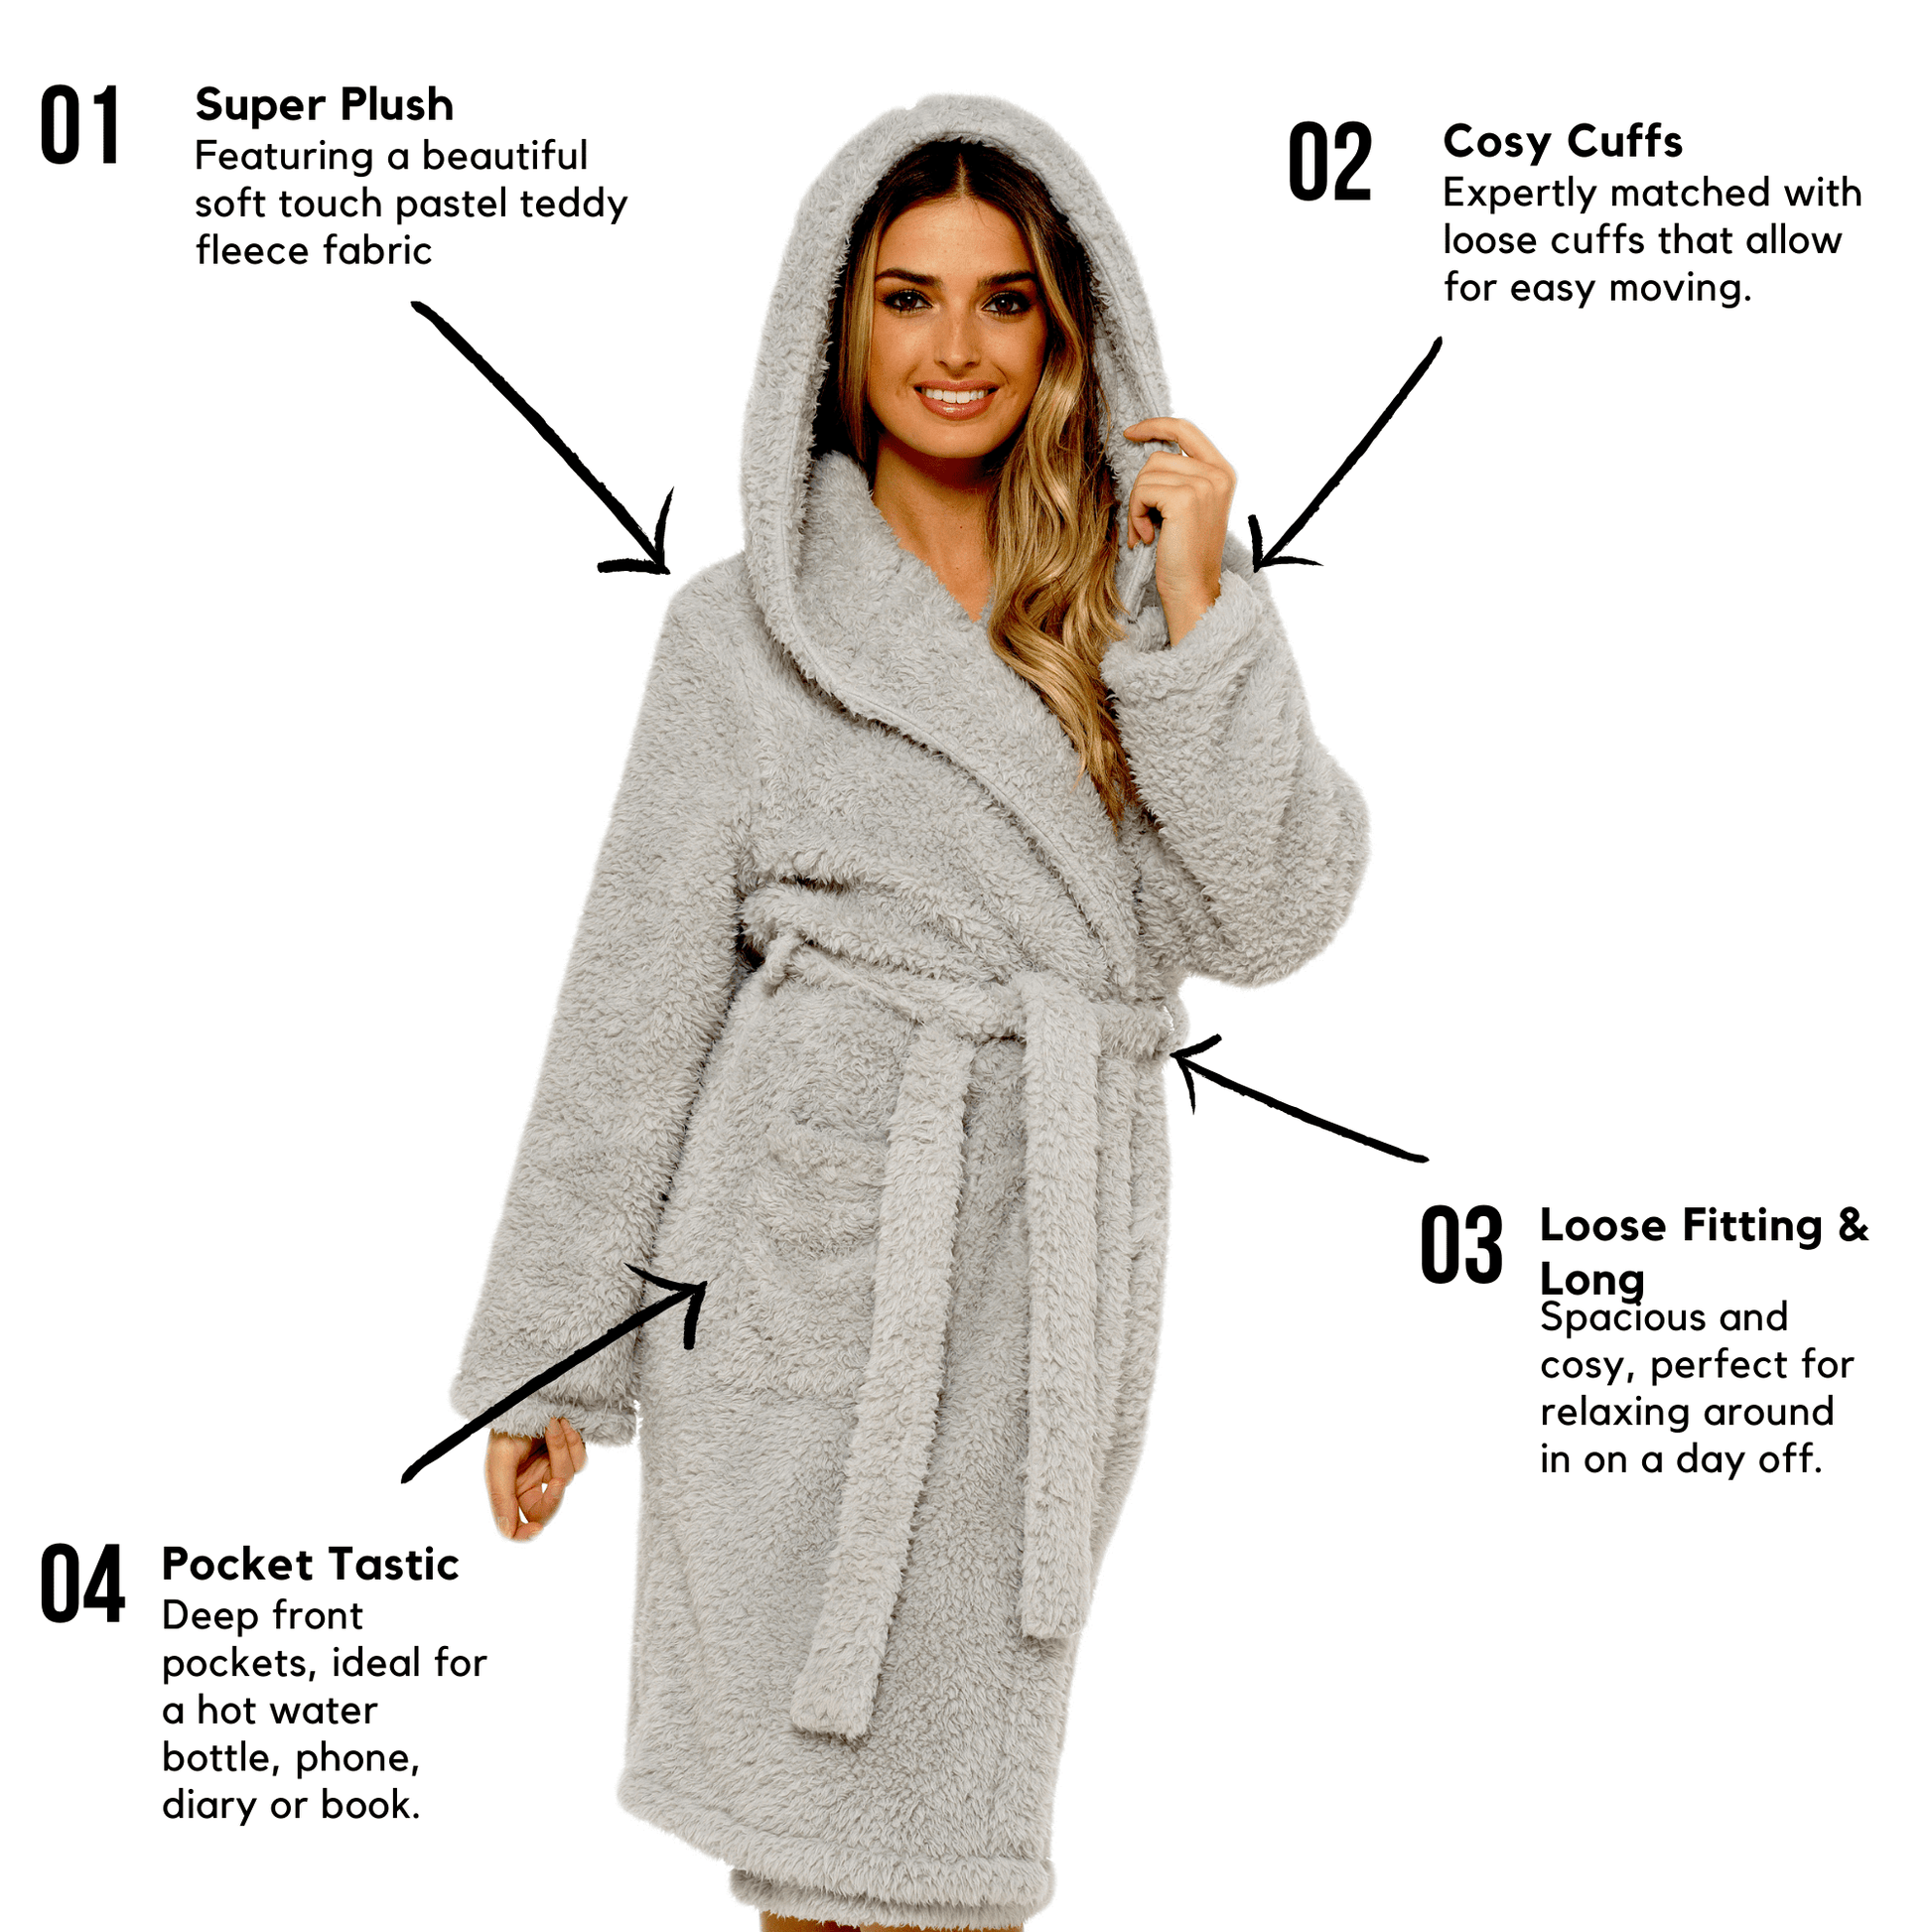 Women's Soft Grey Teddy Fleece Hooded Robe Dressing Gown, Ladies Bath Robe Loungewear. Buy now for £20.00. A Robe by Daisy Dreamer. 12-14, 16-18, 20-22, 8-10, bridesmaid, charcoal, daisy dreamer, dressing gown, fleece, grey, gym, hooded robe, hotel, ladie